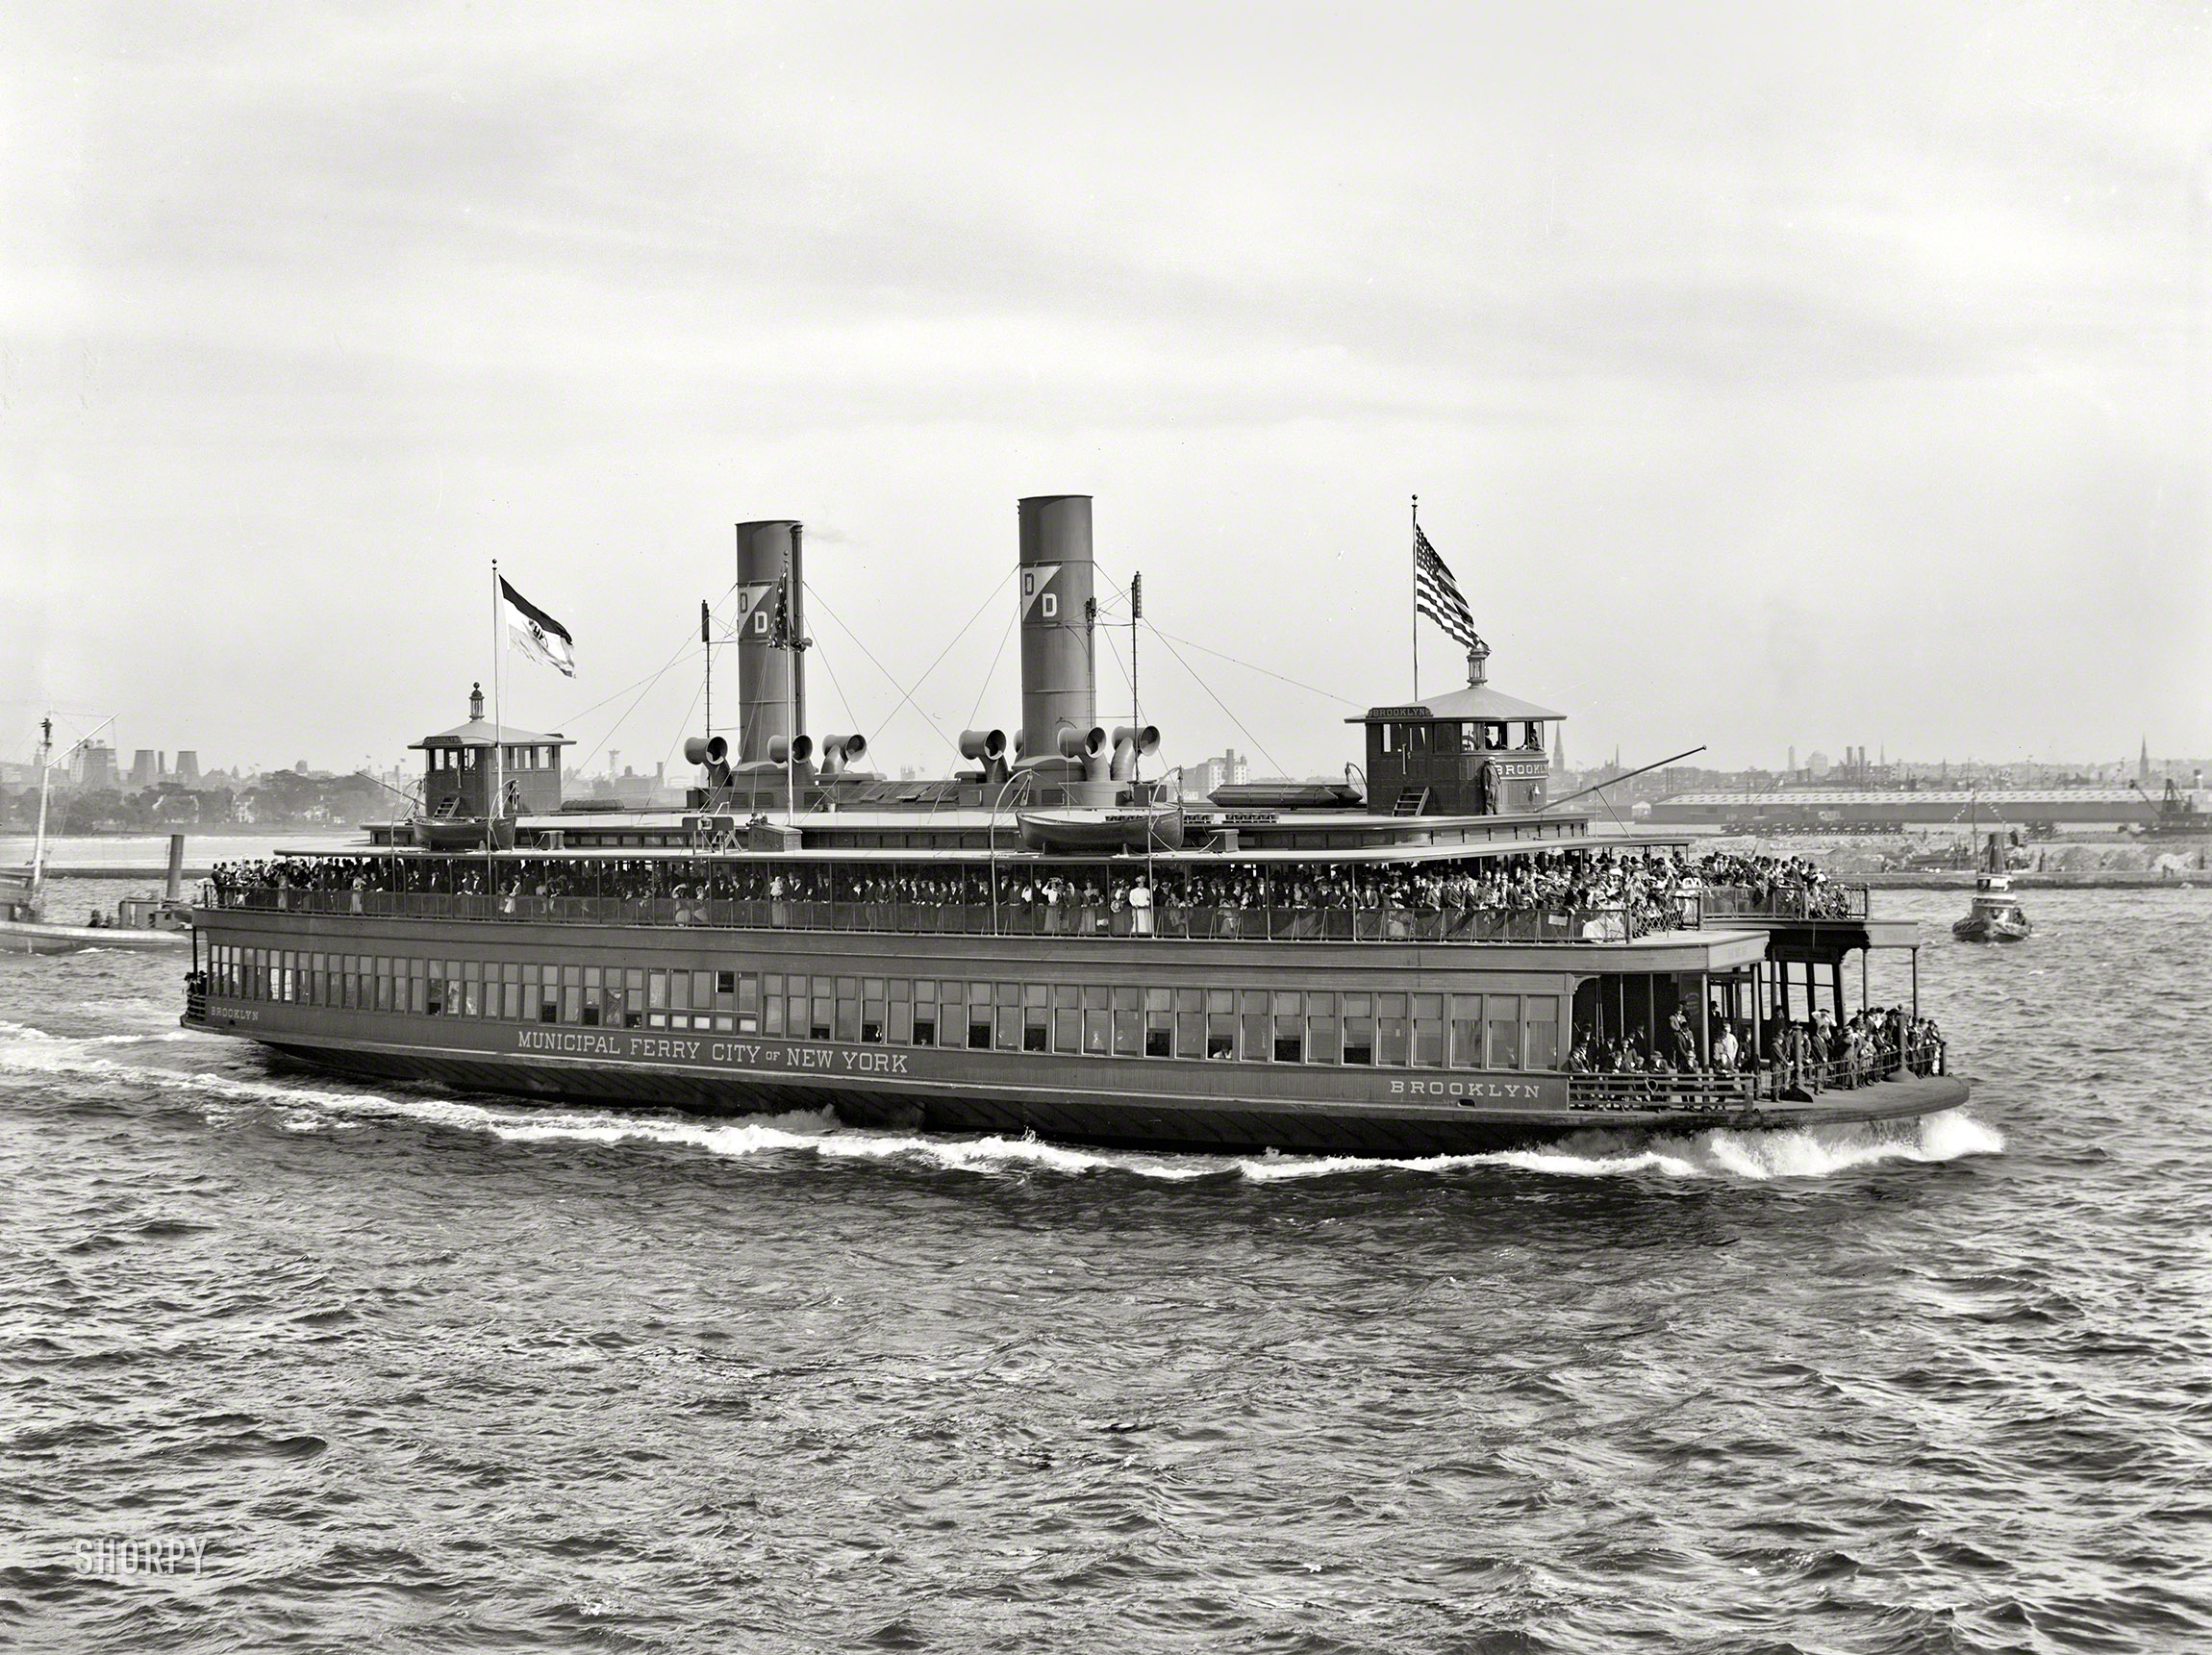 The Hudson River circa 1909. "City of New York municipal ferry Brooklyn, possibly a participant in the Hudson-Fulton celebration." 8x10 inch dry plate glass negative, Detroit Publishing Company. View full size.